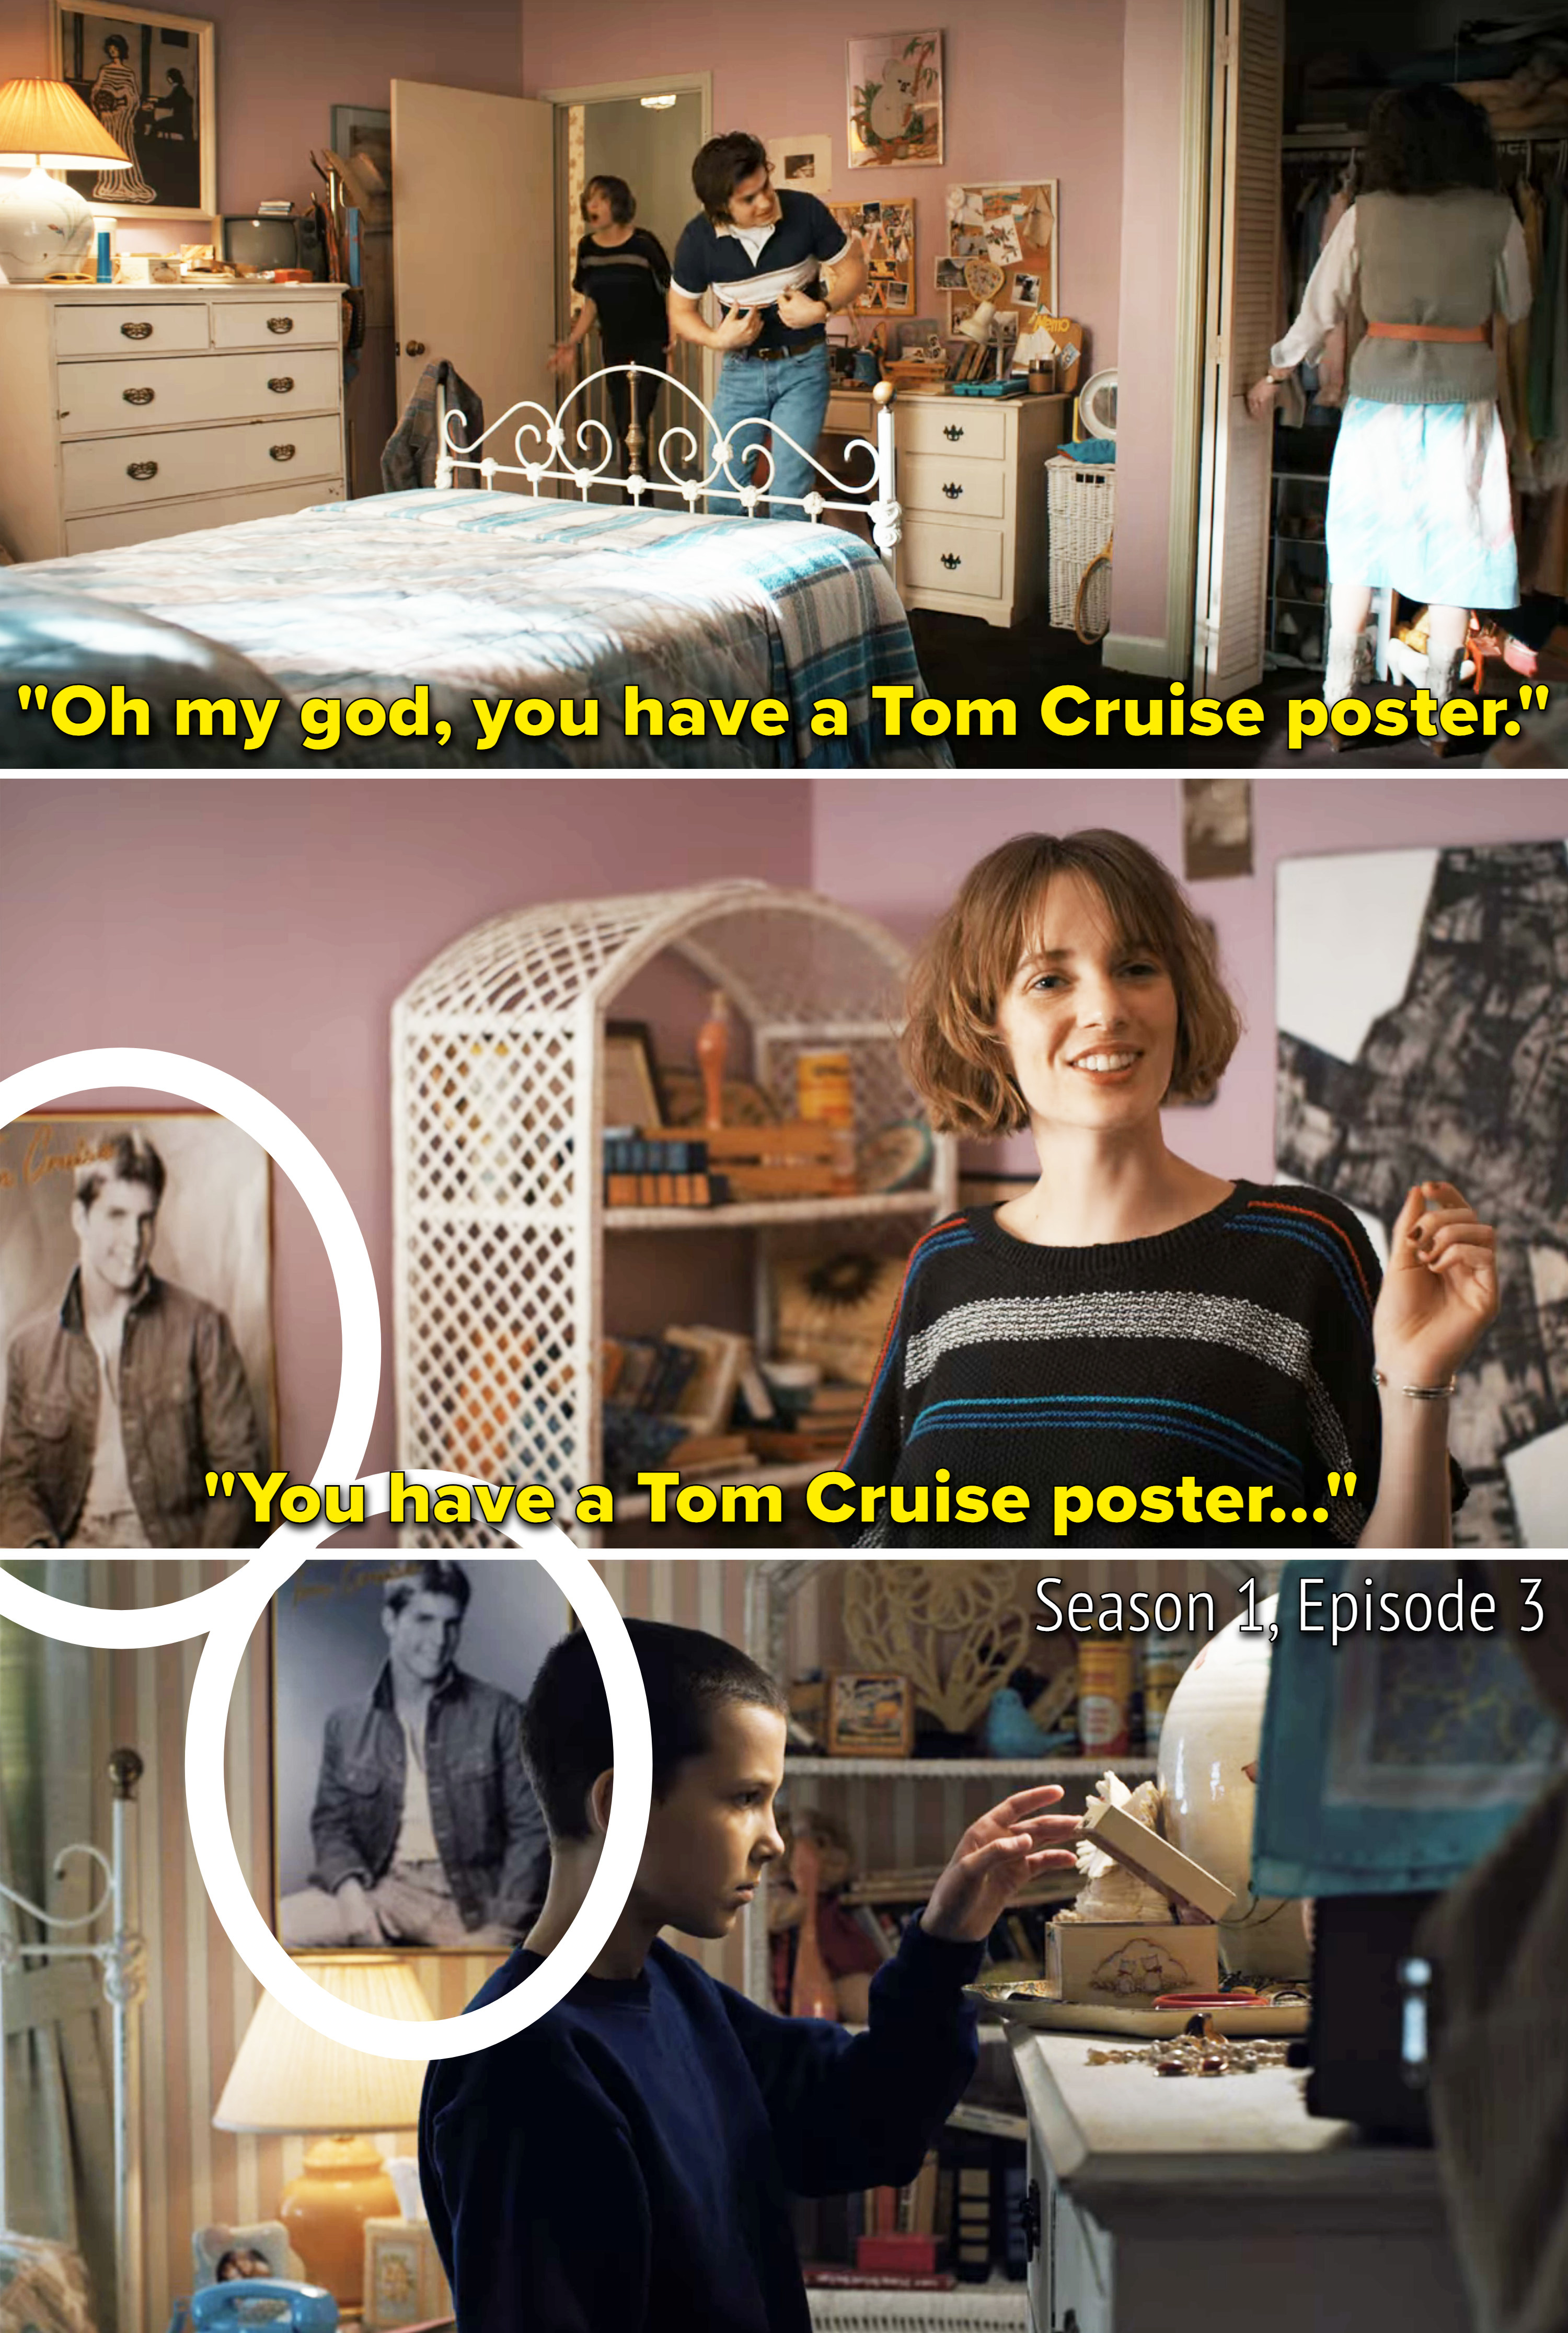 A friend pointing out the Tom Cruise poster on the wall; Eleven in the bedroom